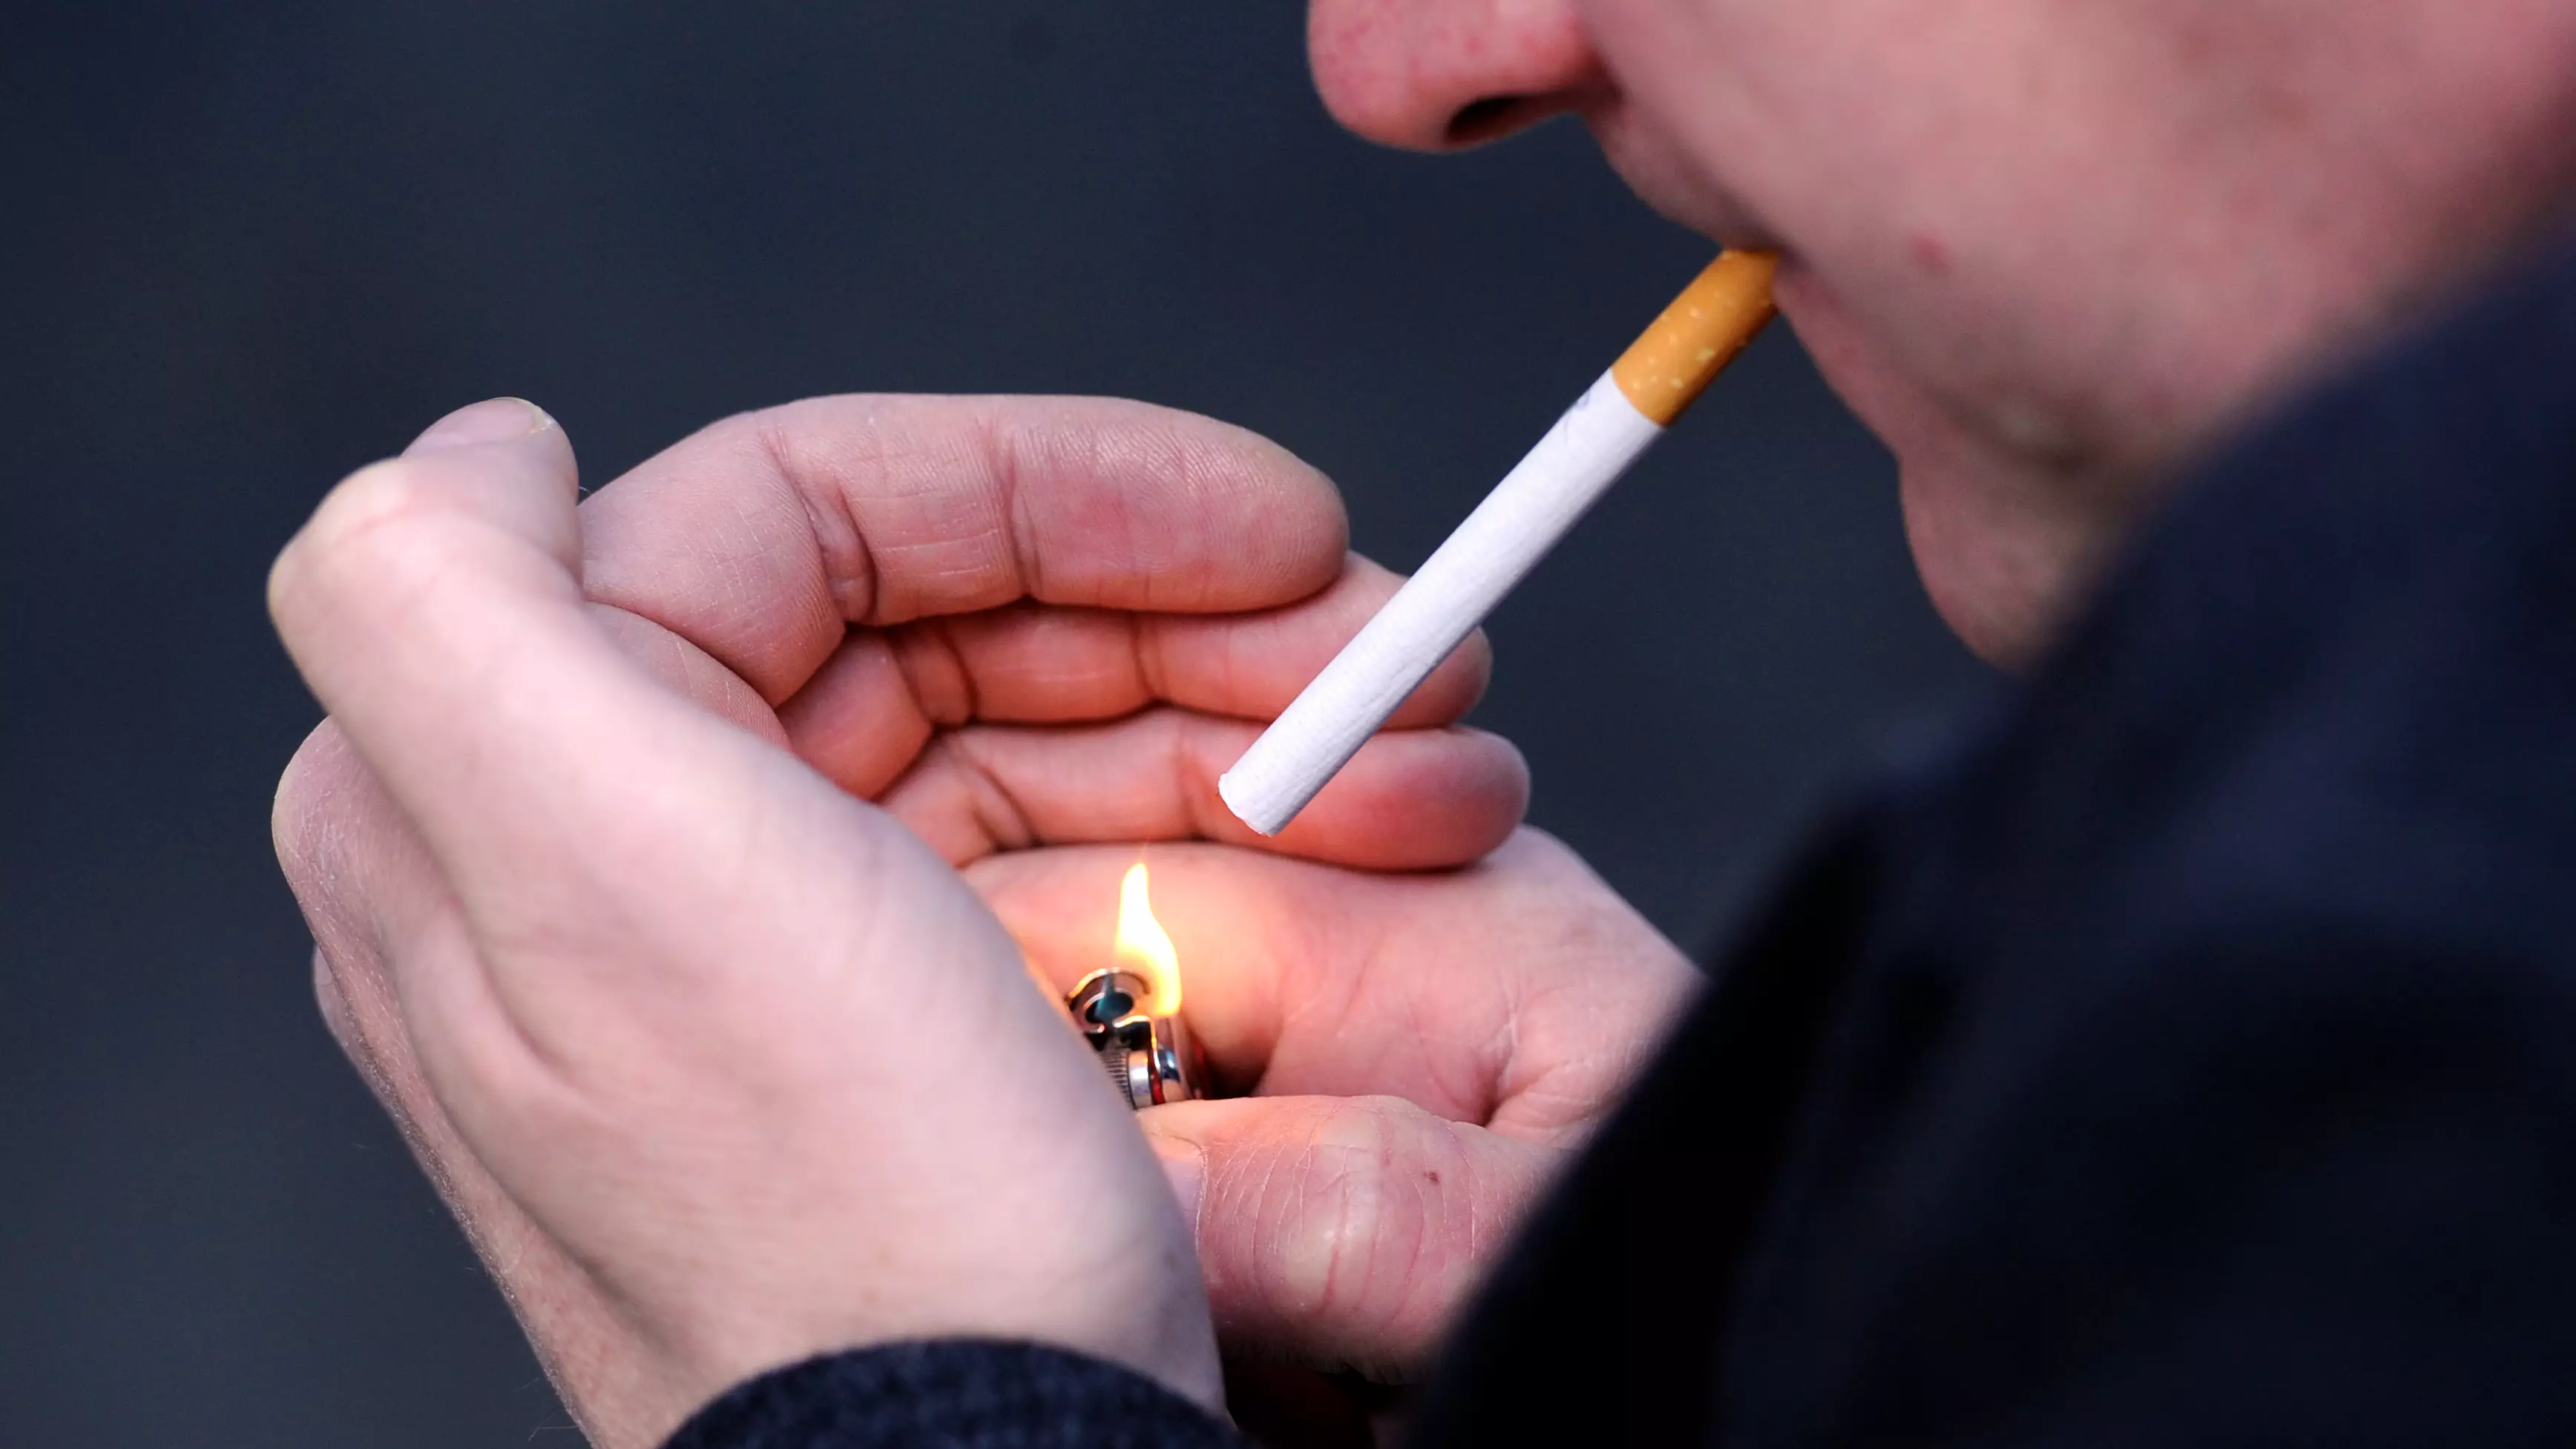 Menthol Cigarettes To Be Made Illegal This Year